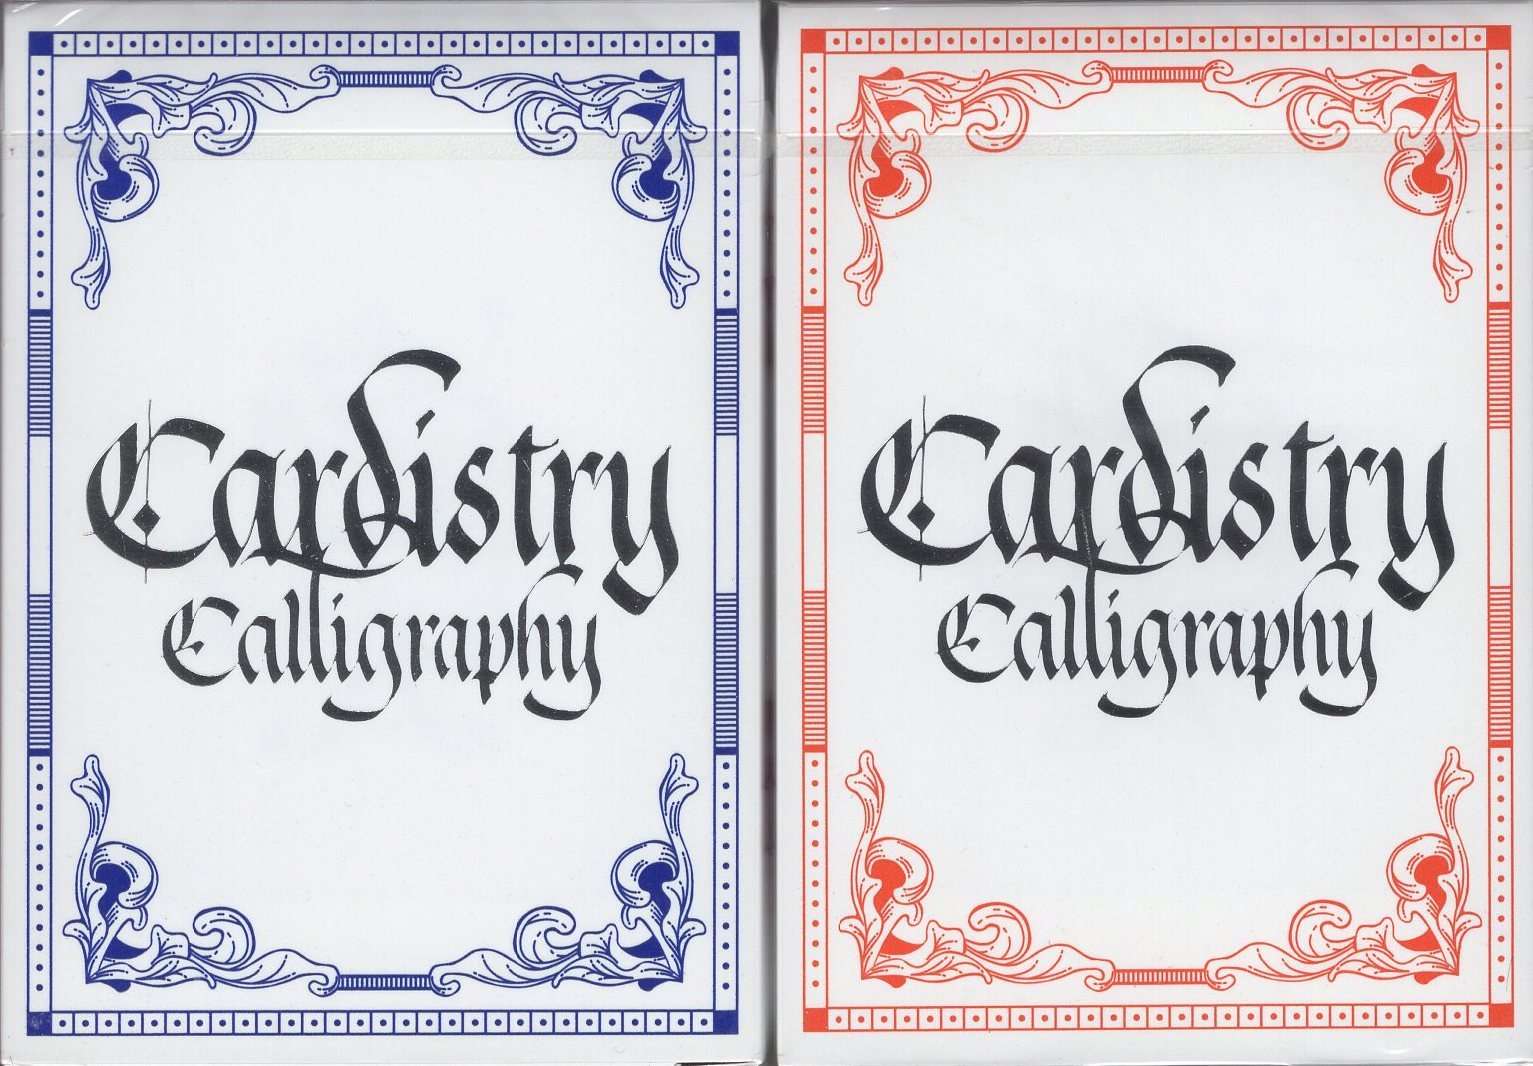 PlayingCardDecks.com-Cardistry Calligraphy Playing Cards - Blue & Red: 2 Deck Set